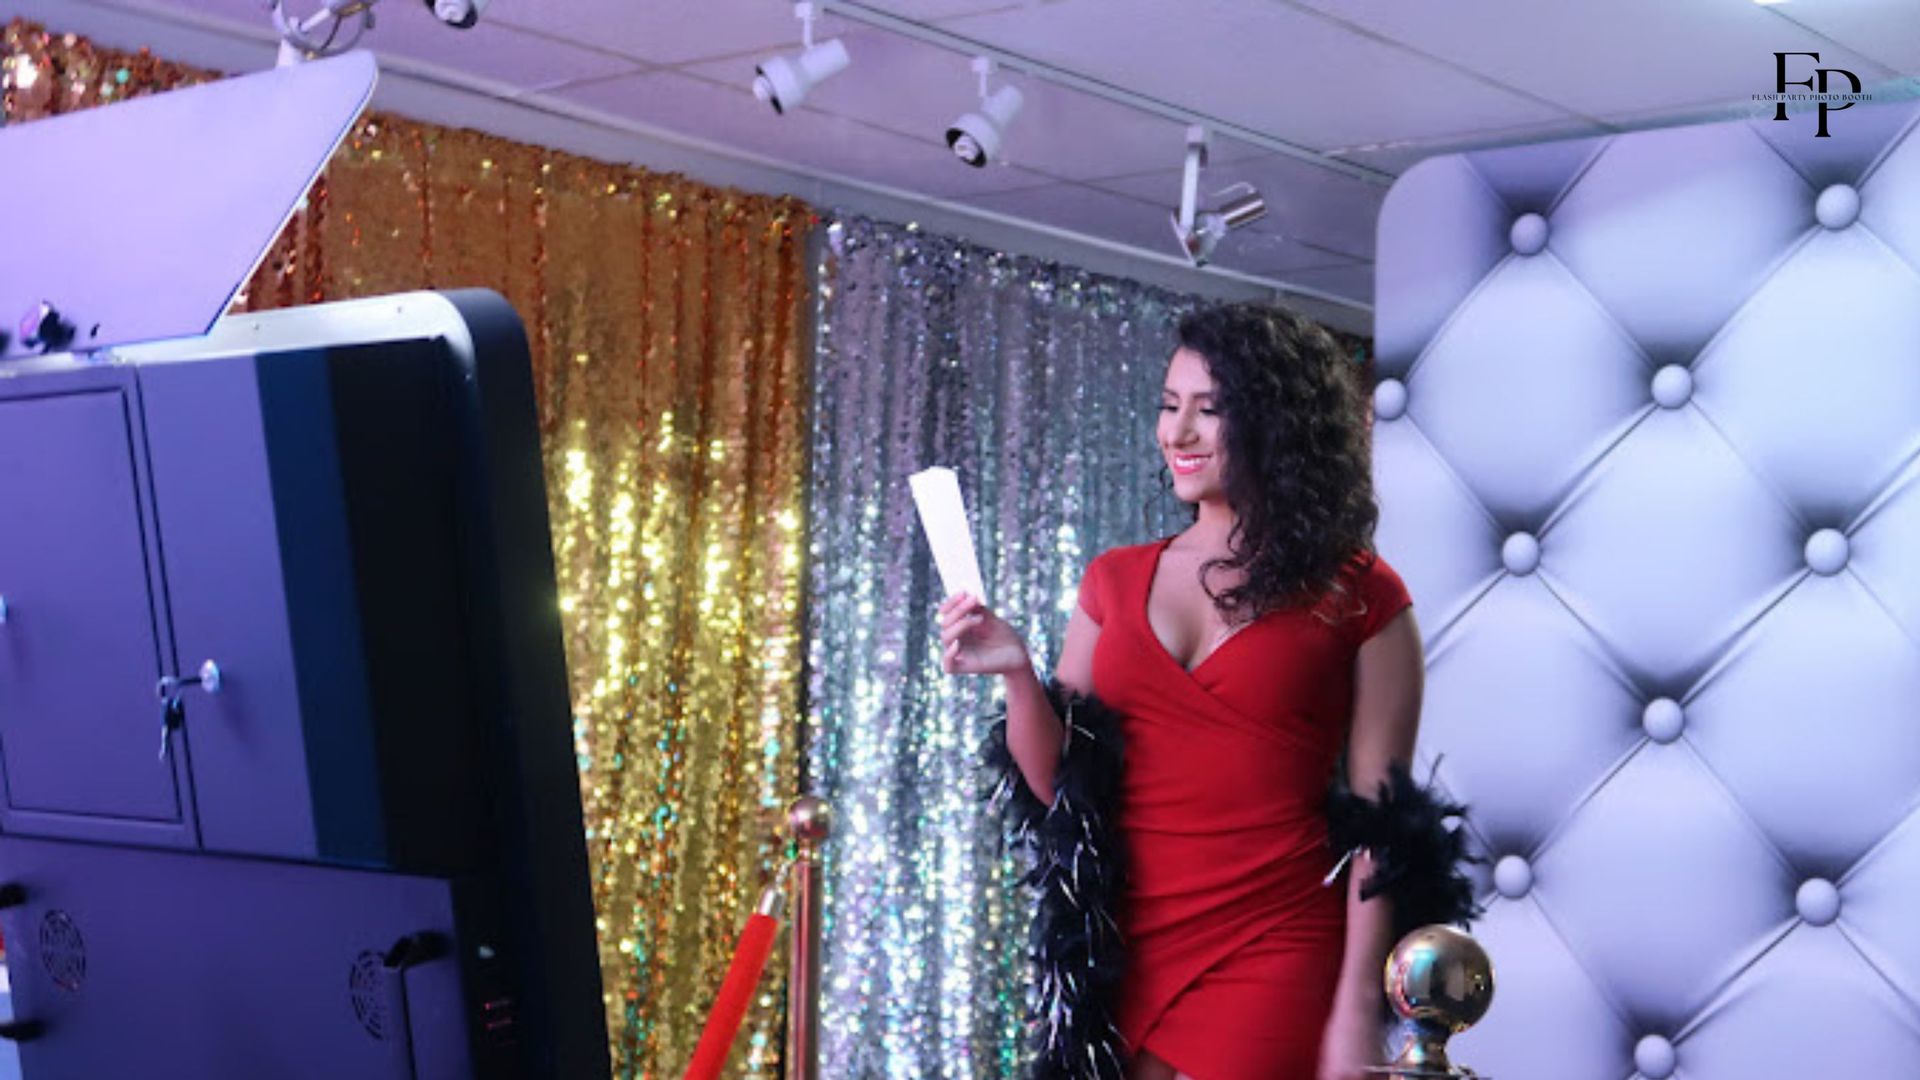 Birthday celebrant poses in a smart mirror photo booth at the Frisco event.